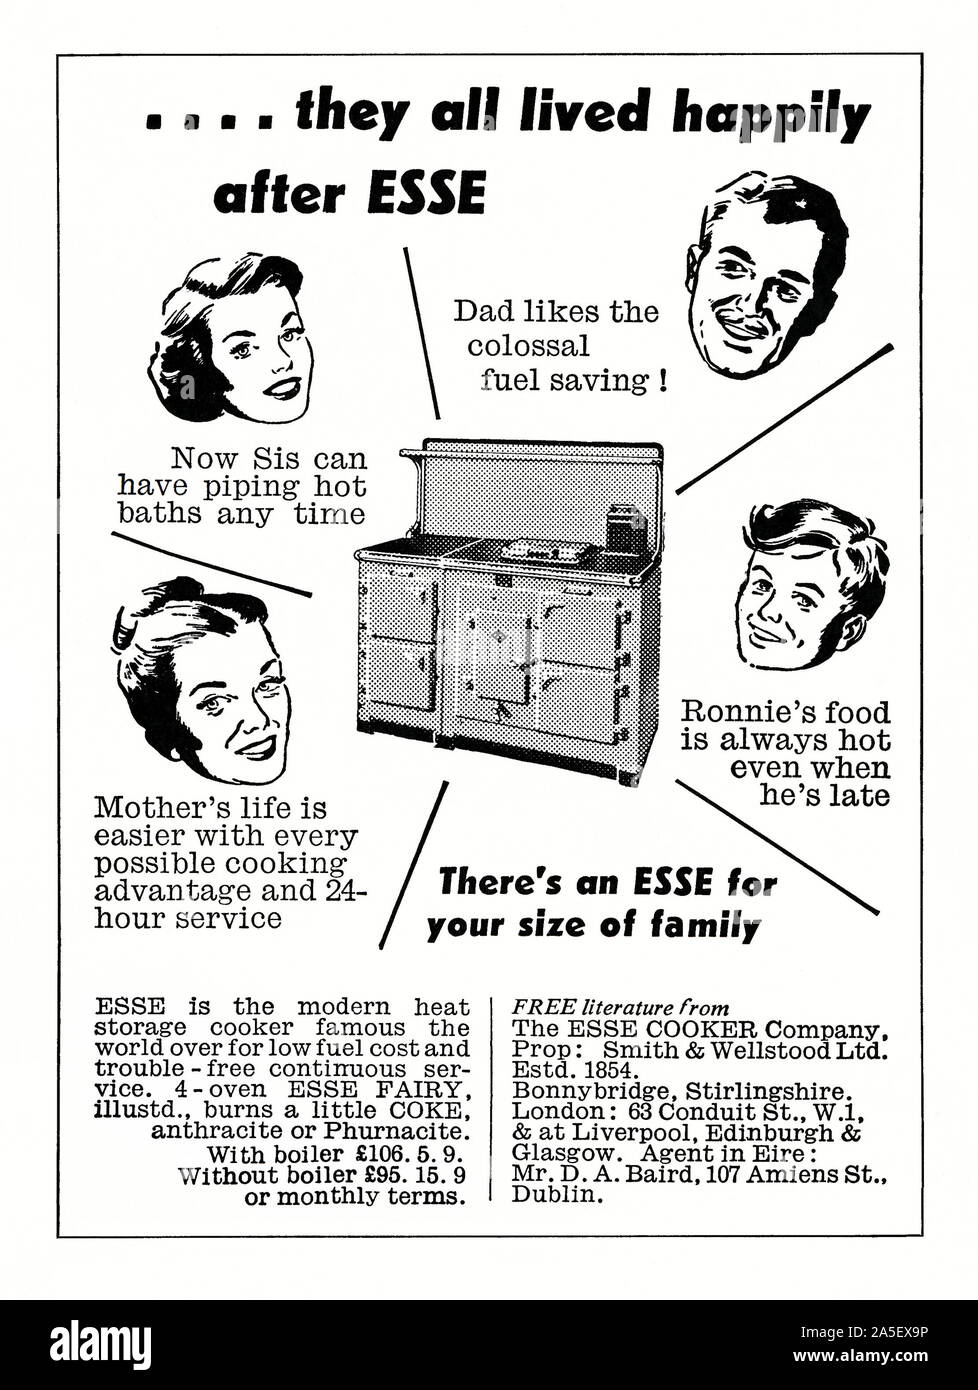 Advert for an Esse heat storage range-type cooker, 1951. The illustration shows a range cooker that ran on coke or anthracite coal and was available with or without a built-in boiler for heating water. The 'Esse' brand name was chosen because it sounded French. The business prospered throughout the 19th and early 20th centuries and the company were able to claim an Esse in every Royal household in Europe - plus Mrs Beeton, Florence Nightingale and Ernest Shackleton were among their famous clients. Esse range cookers and stoves are made in Barnoldswick, Lancashire, England. Stock Photo